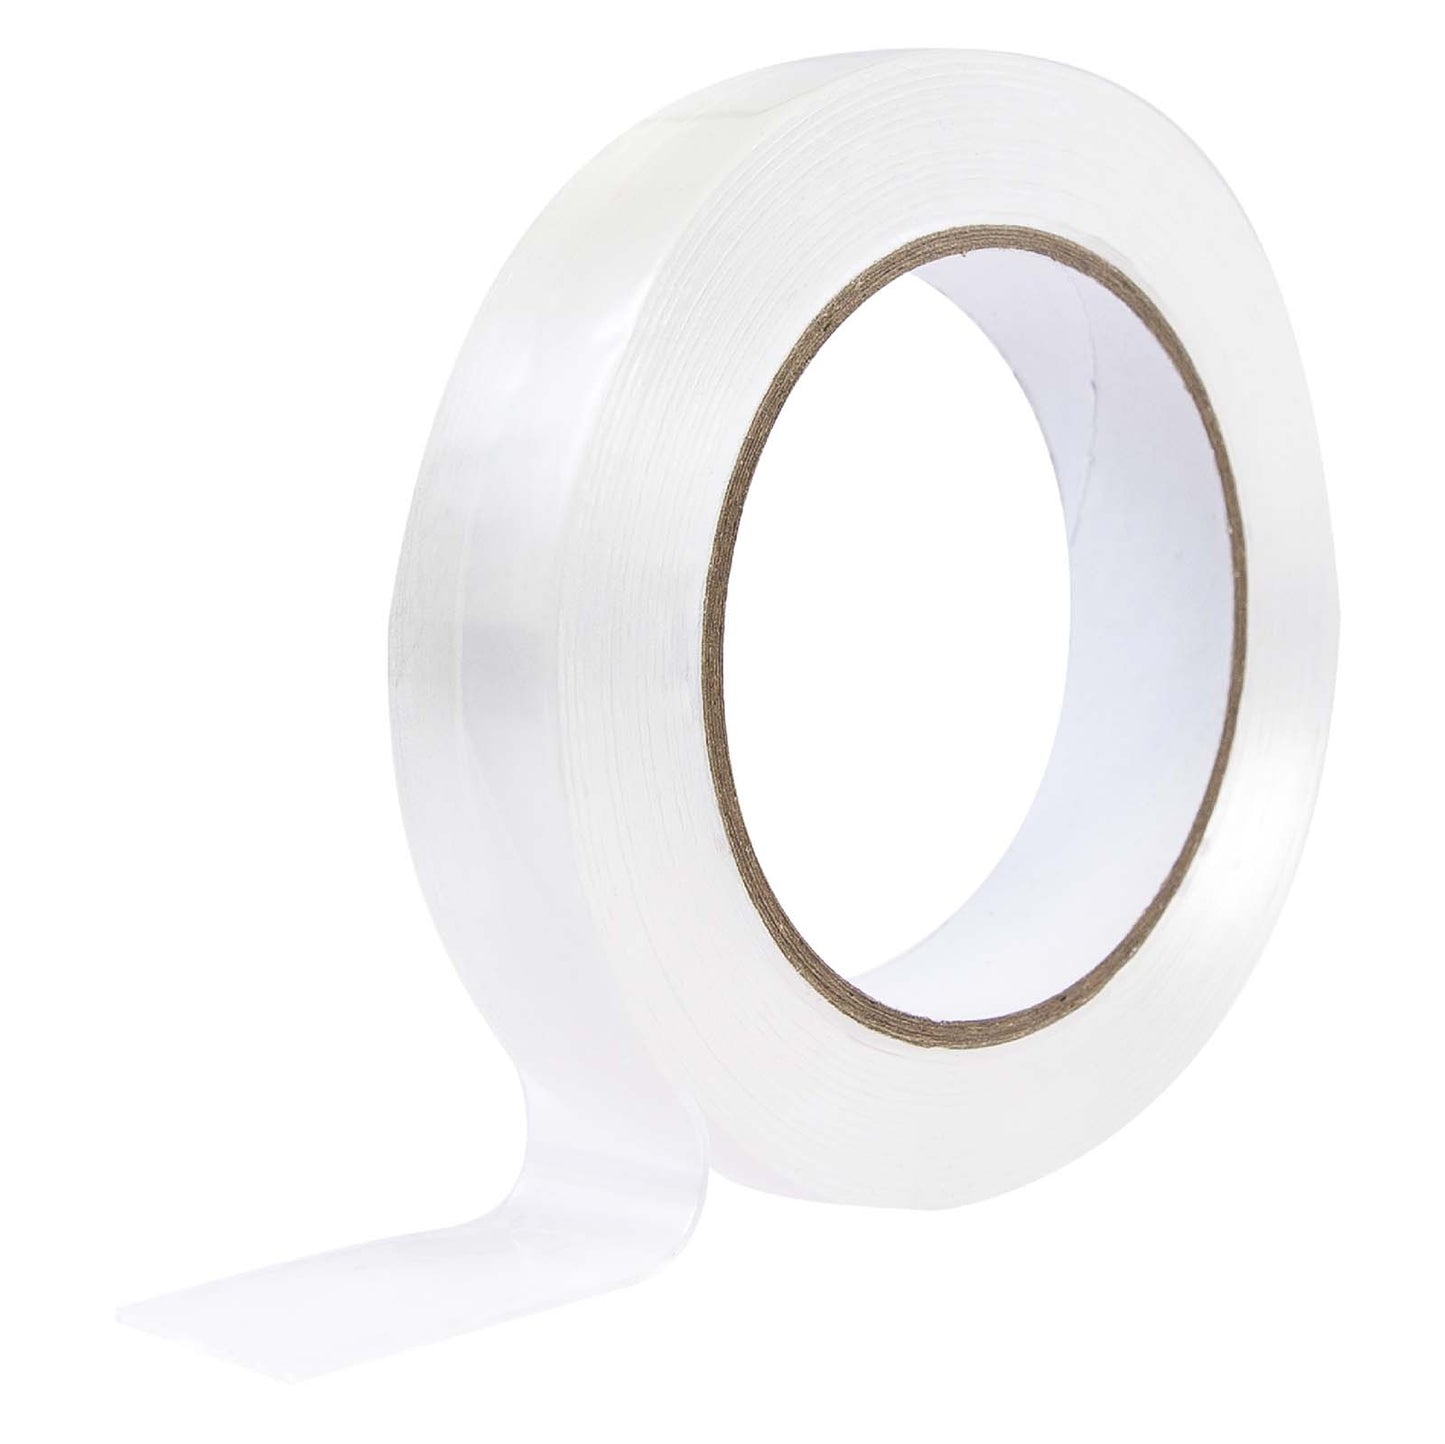 Clear Outdoor Mounting Tape - 16.4' x 0.94" Roll